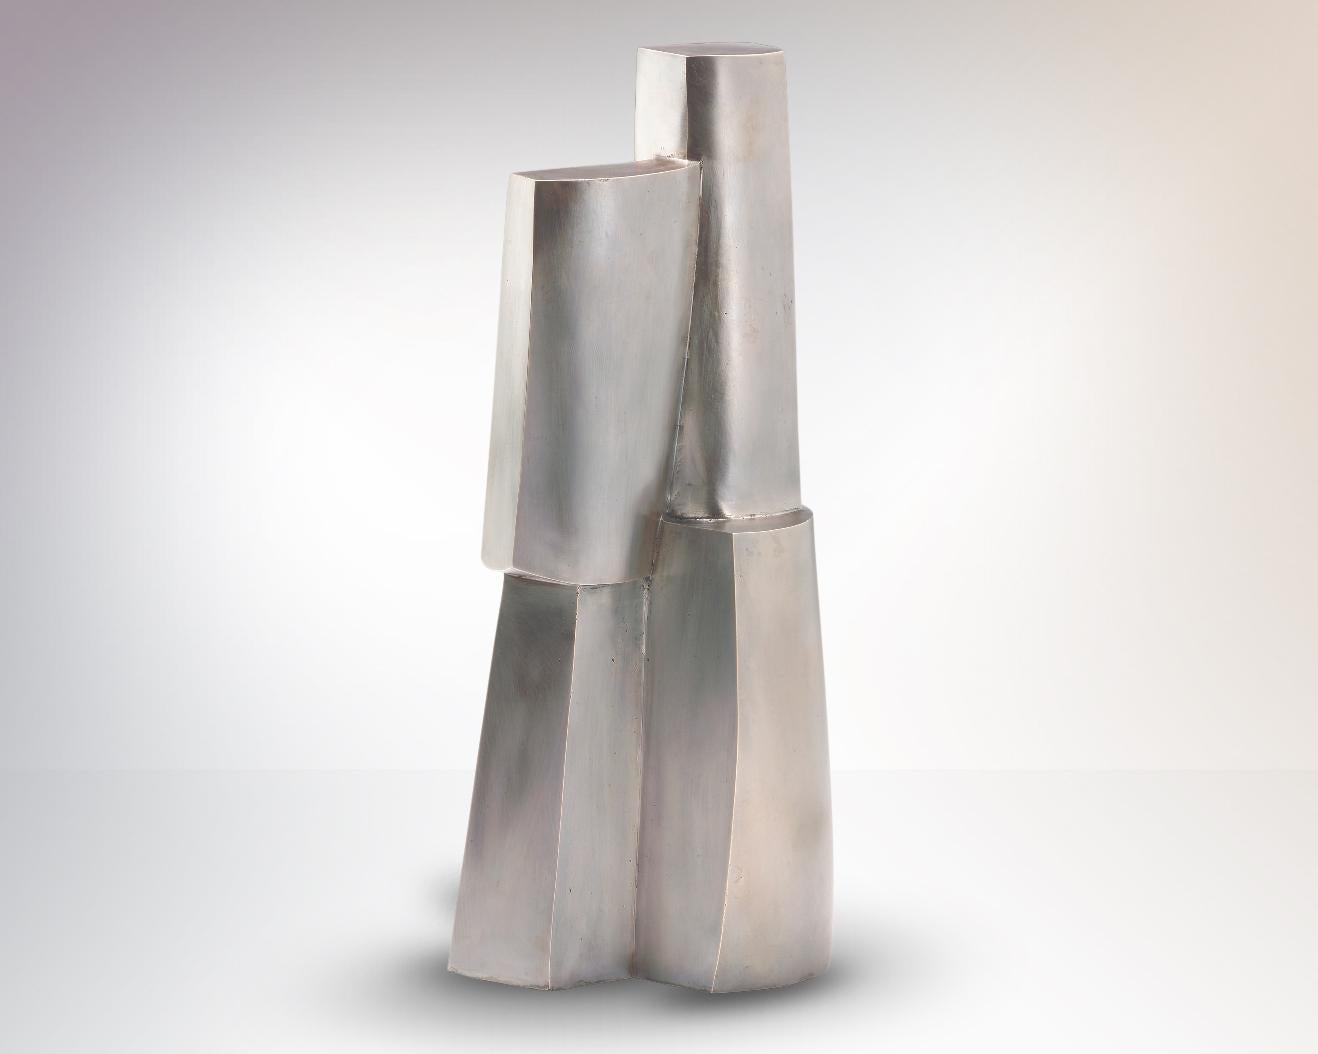 Abstract sculpture with beautiful curved lines.

German silver sculpture (alloy of copper, nickel and zinc)
Numbered and signed artwork
Limited edition 2/9
Measures: 47 x 15 x 20 cm.